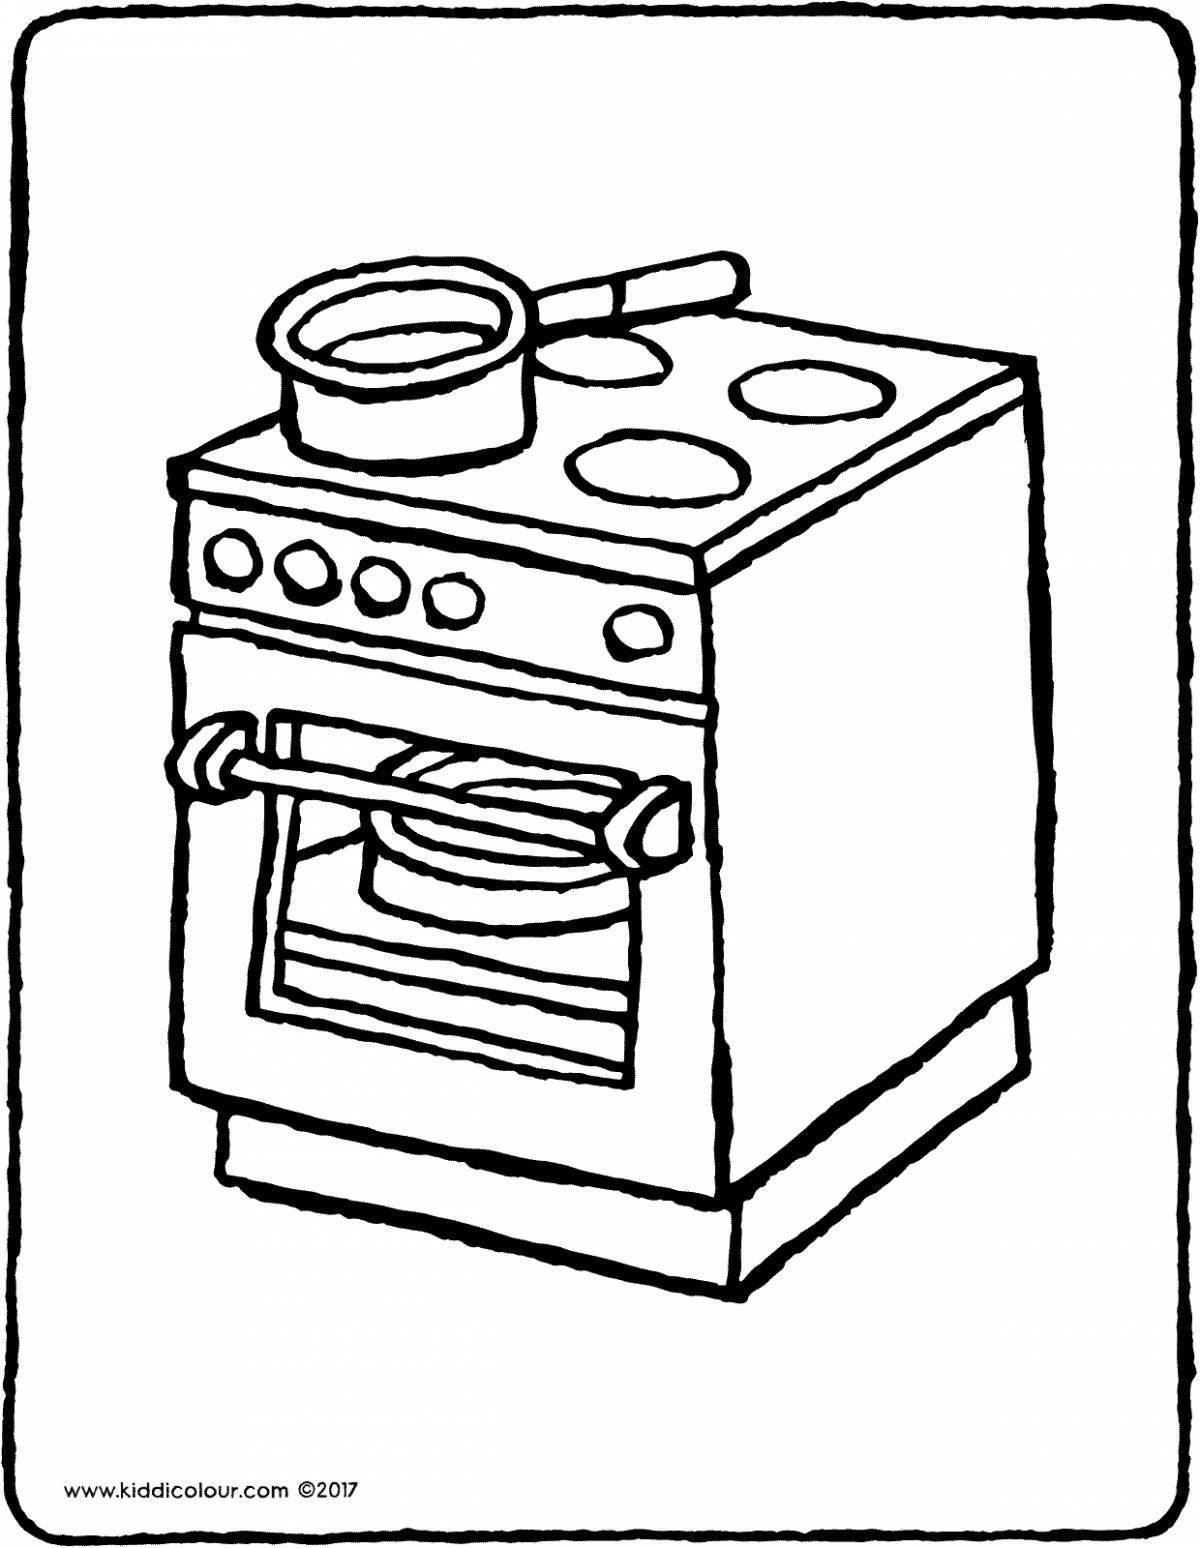 Amazing cooker coloring page